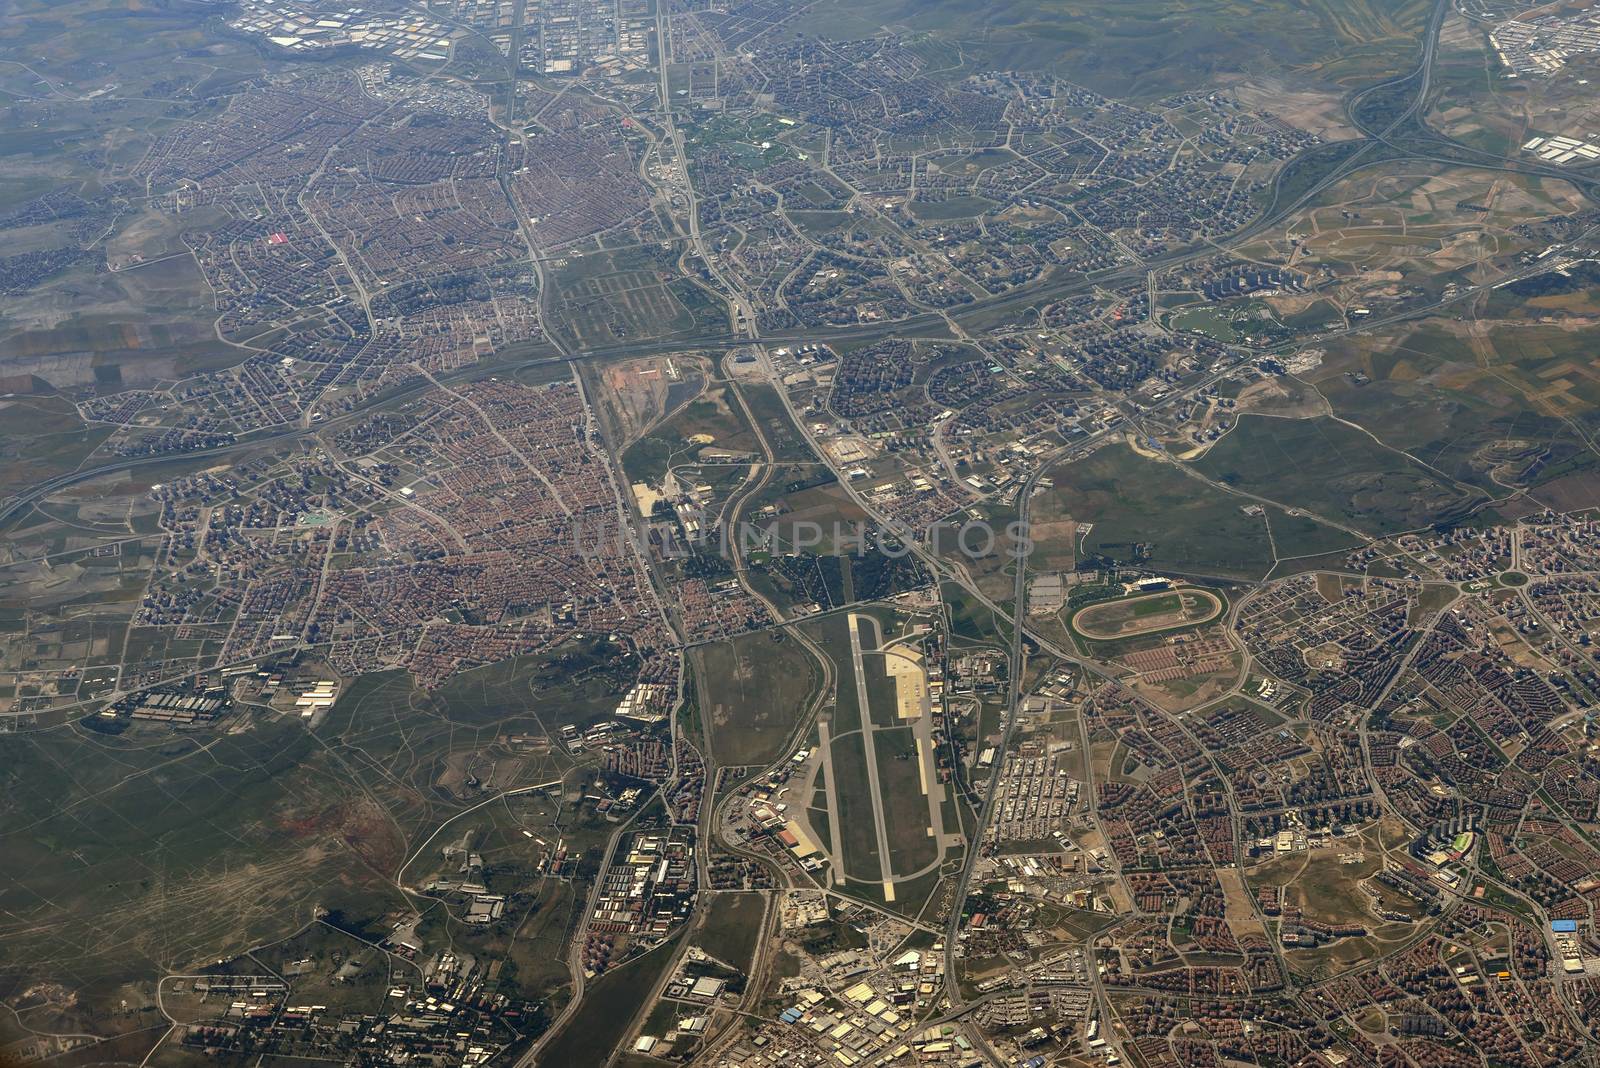 Aerial view of the city. Buildings, fields, trees and roads